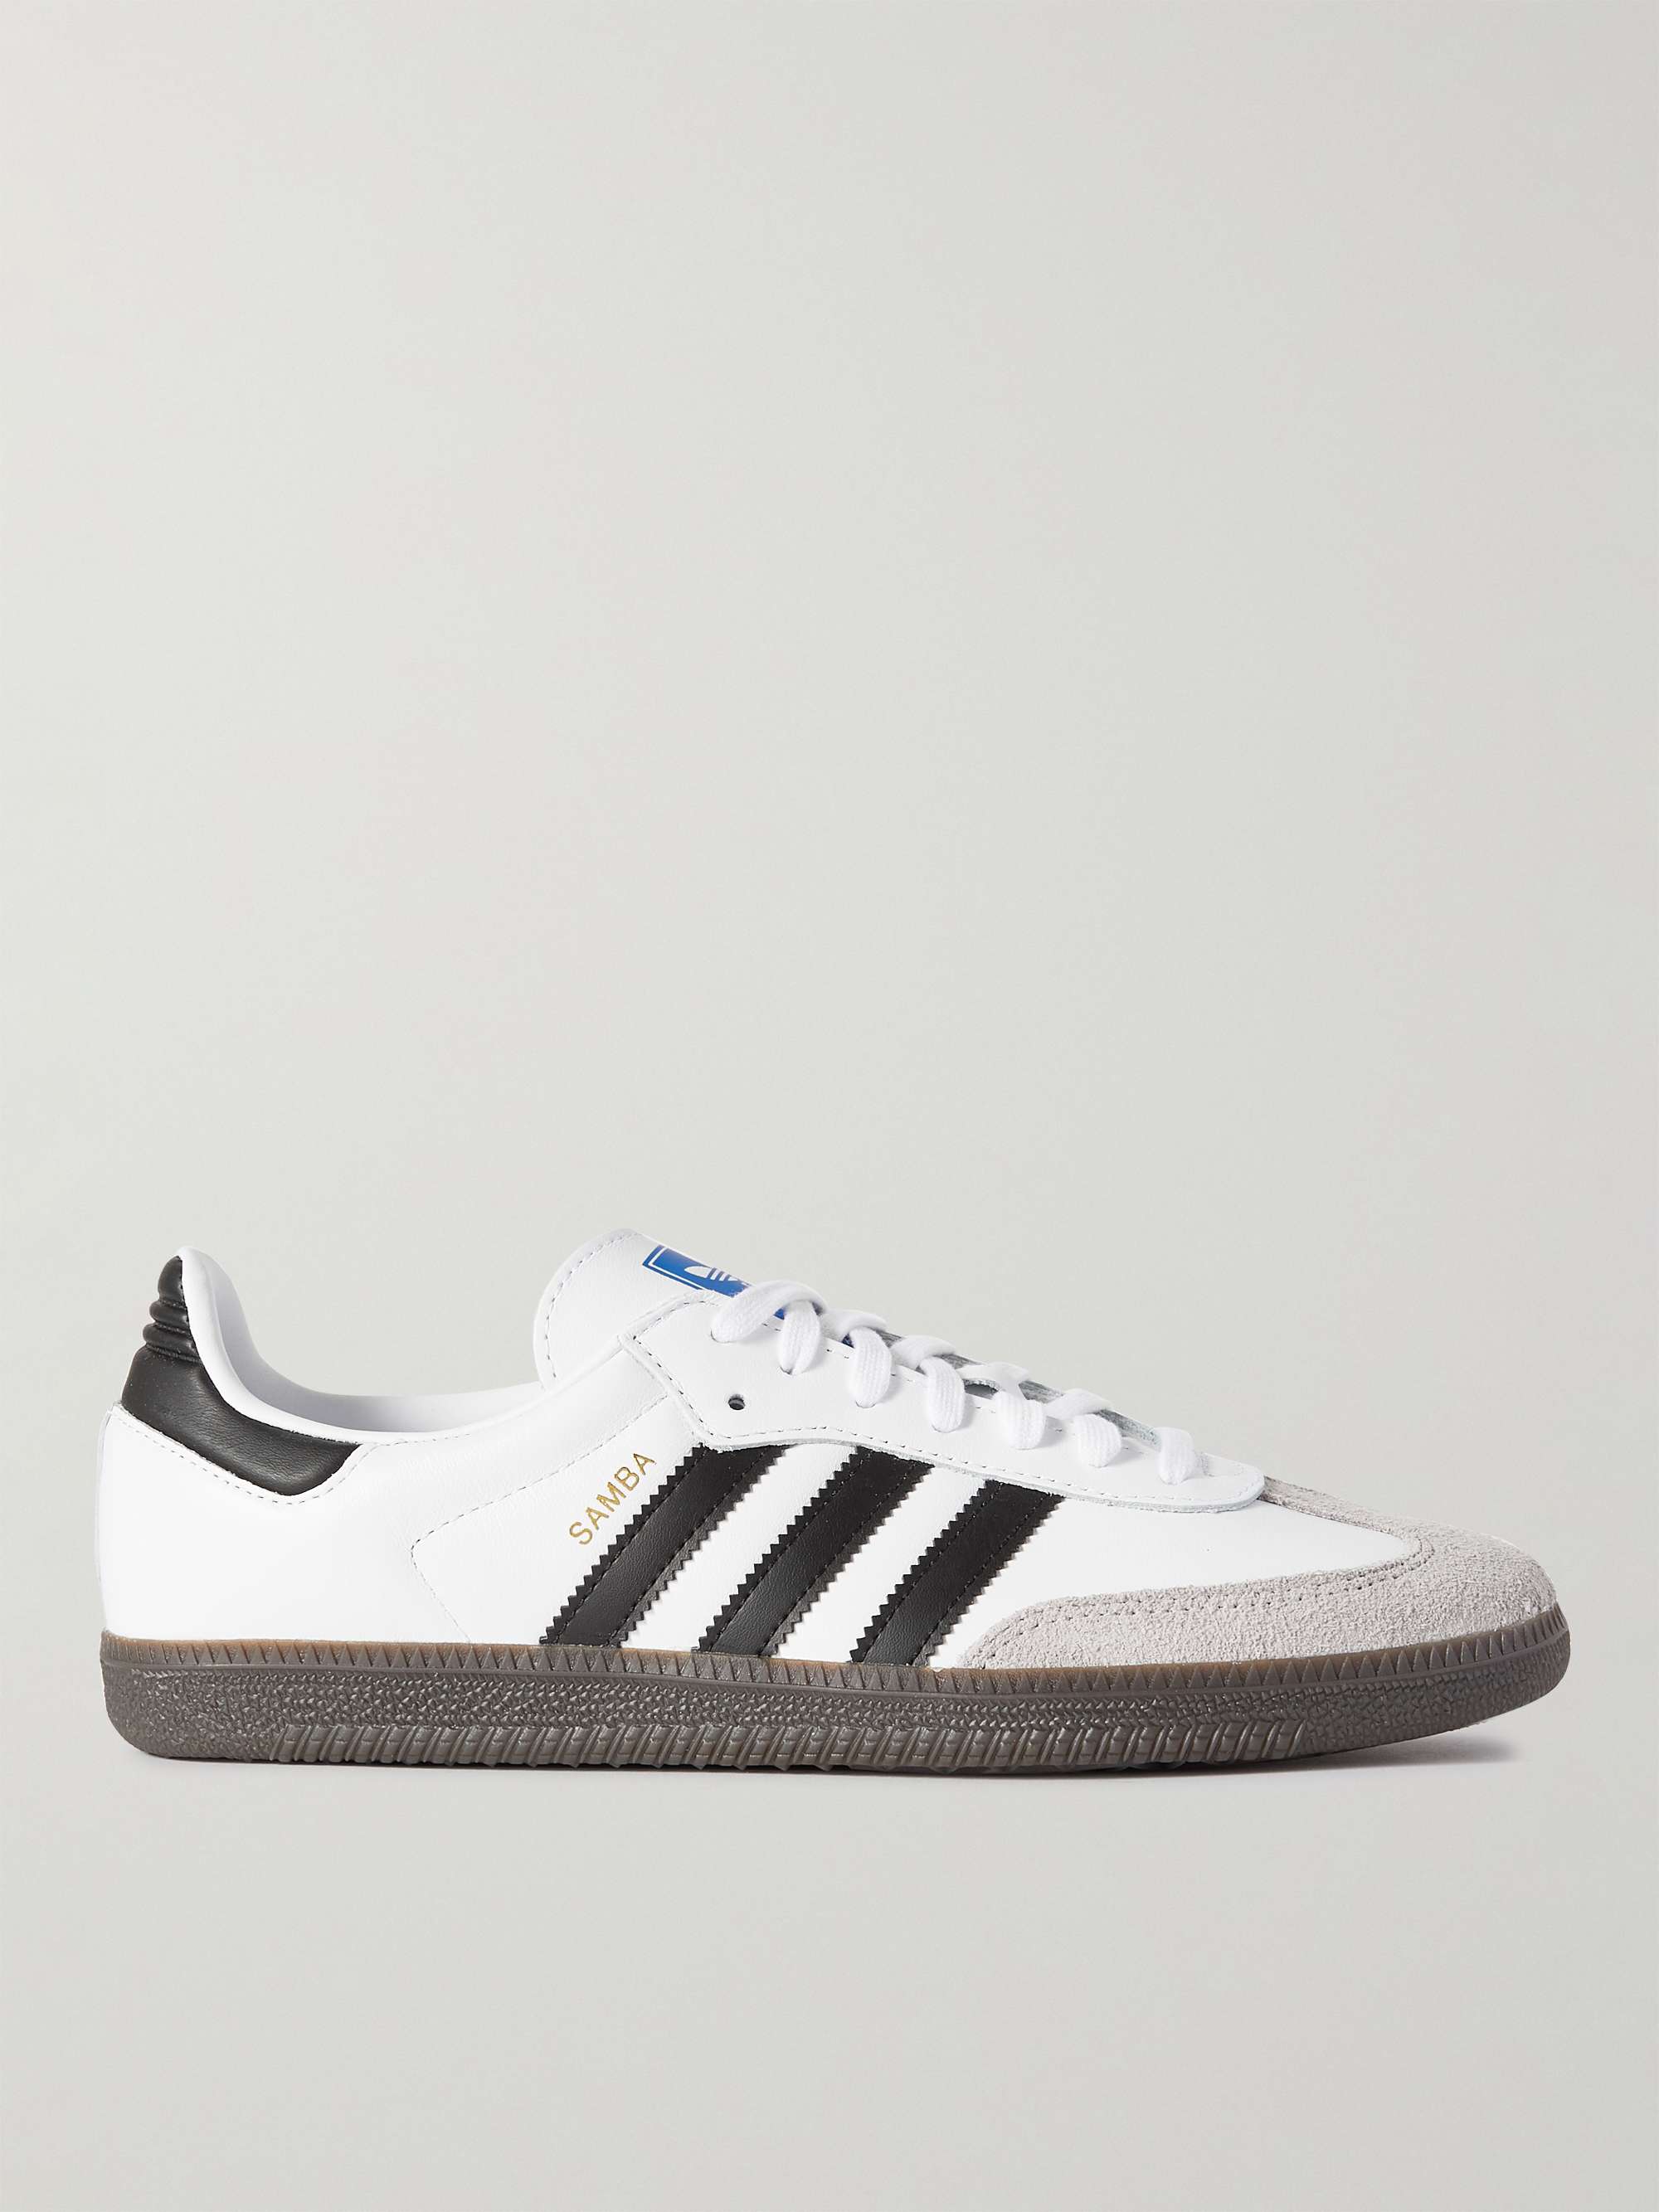 White Samba Suede-Trimmed Leather Sneakers | ADIDAS ORIGINALS | MR PORTER